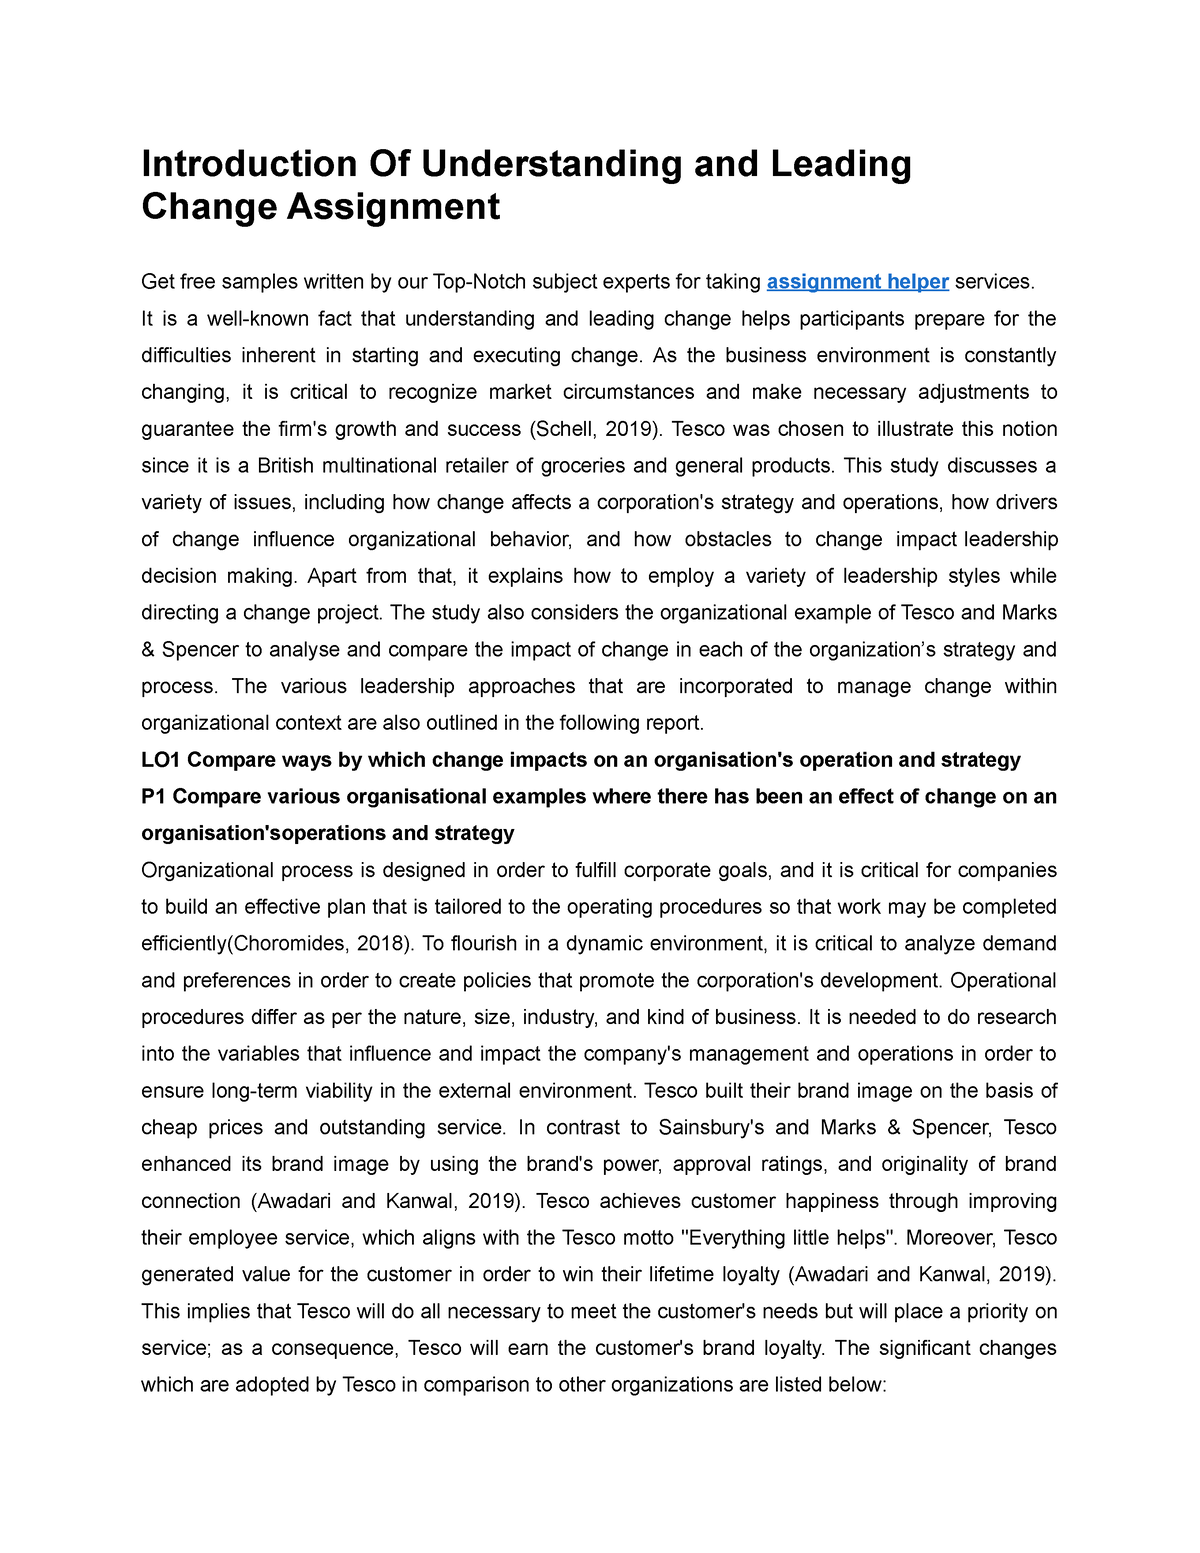 understanding and leading change assignment sample